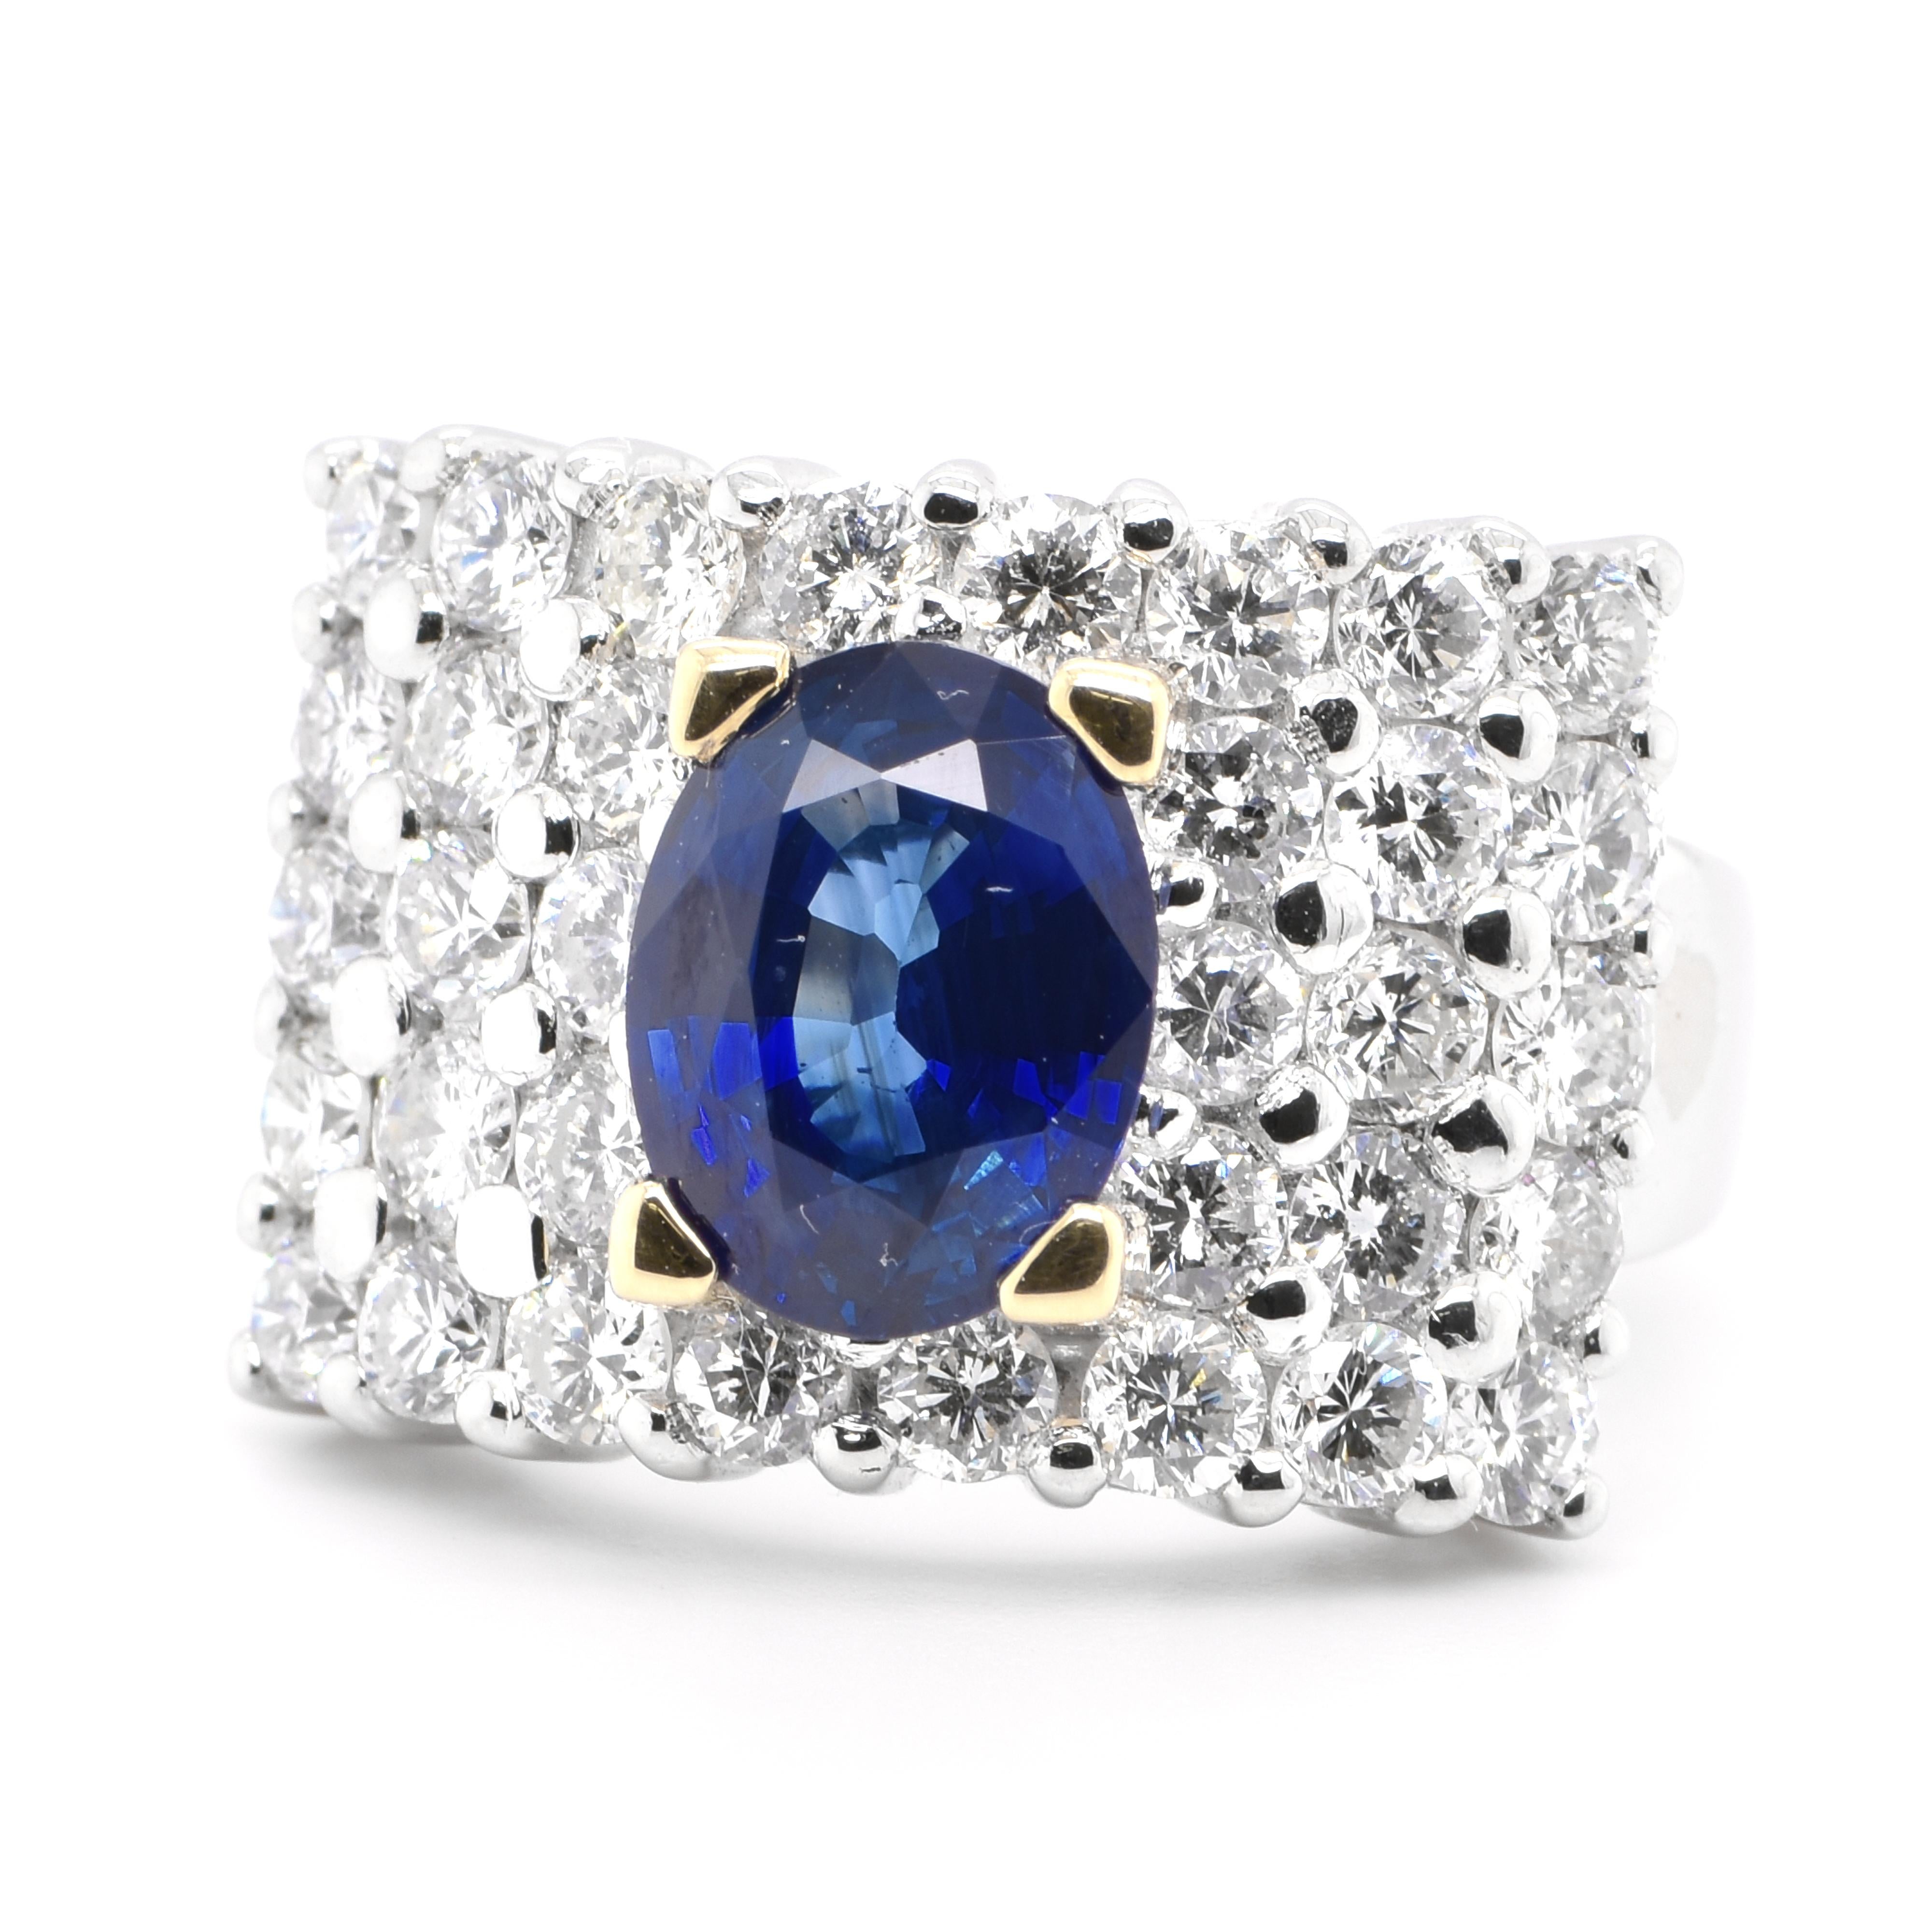 A beautiful Ring featuring a 2.55 Carat Natural Blue Sapphire and 2.18 Carats Diamond Accents set in Platinum. Sapphires have extraordinary durability - they excel in hardness as well as toughness and durability making them very popular in jewelry.